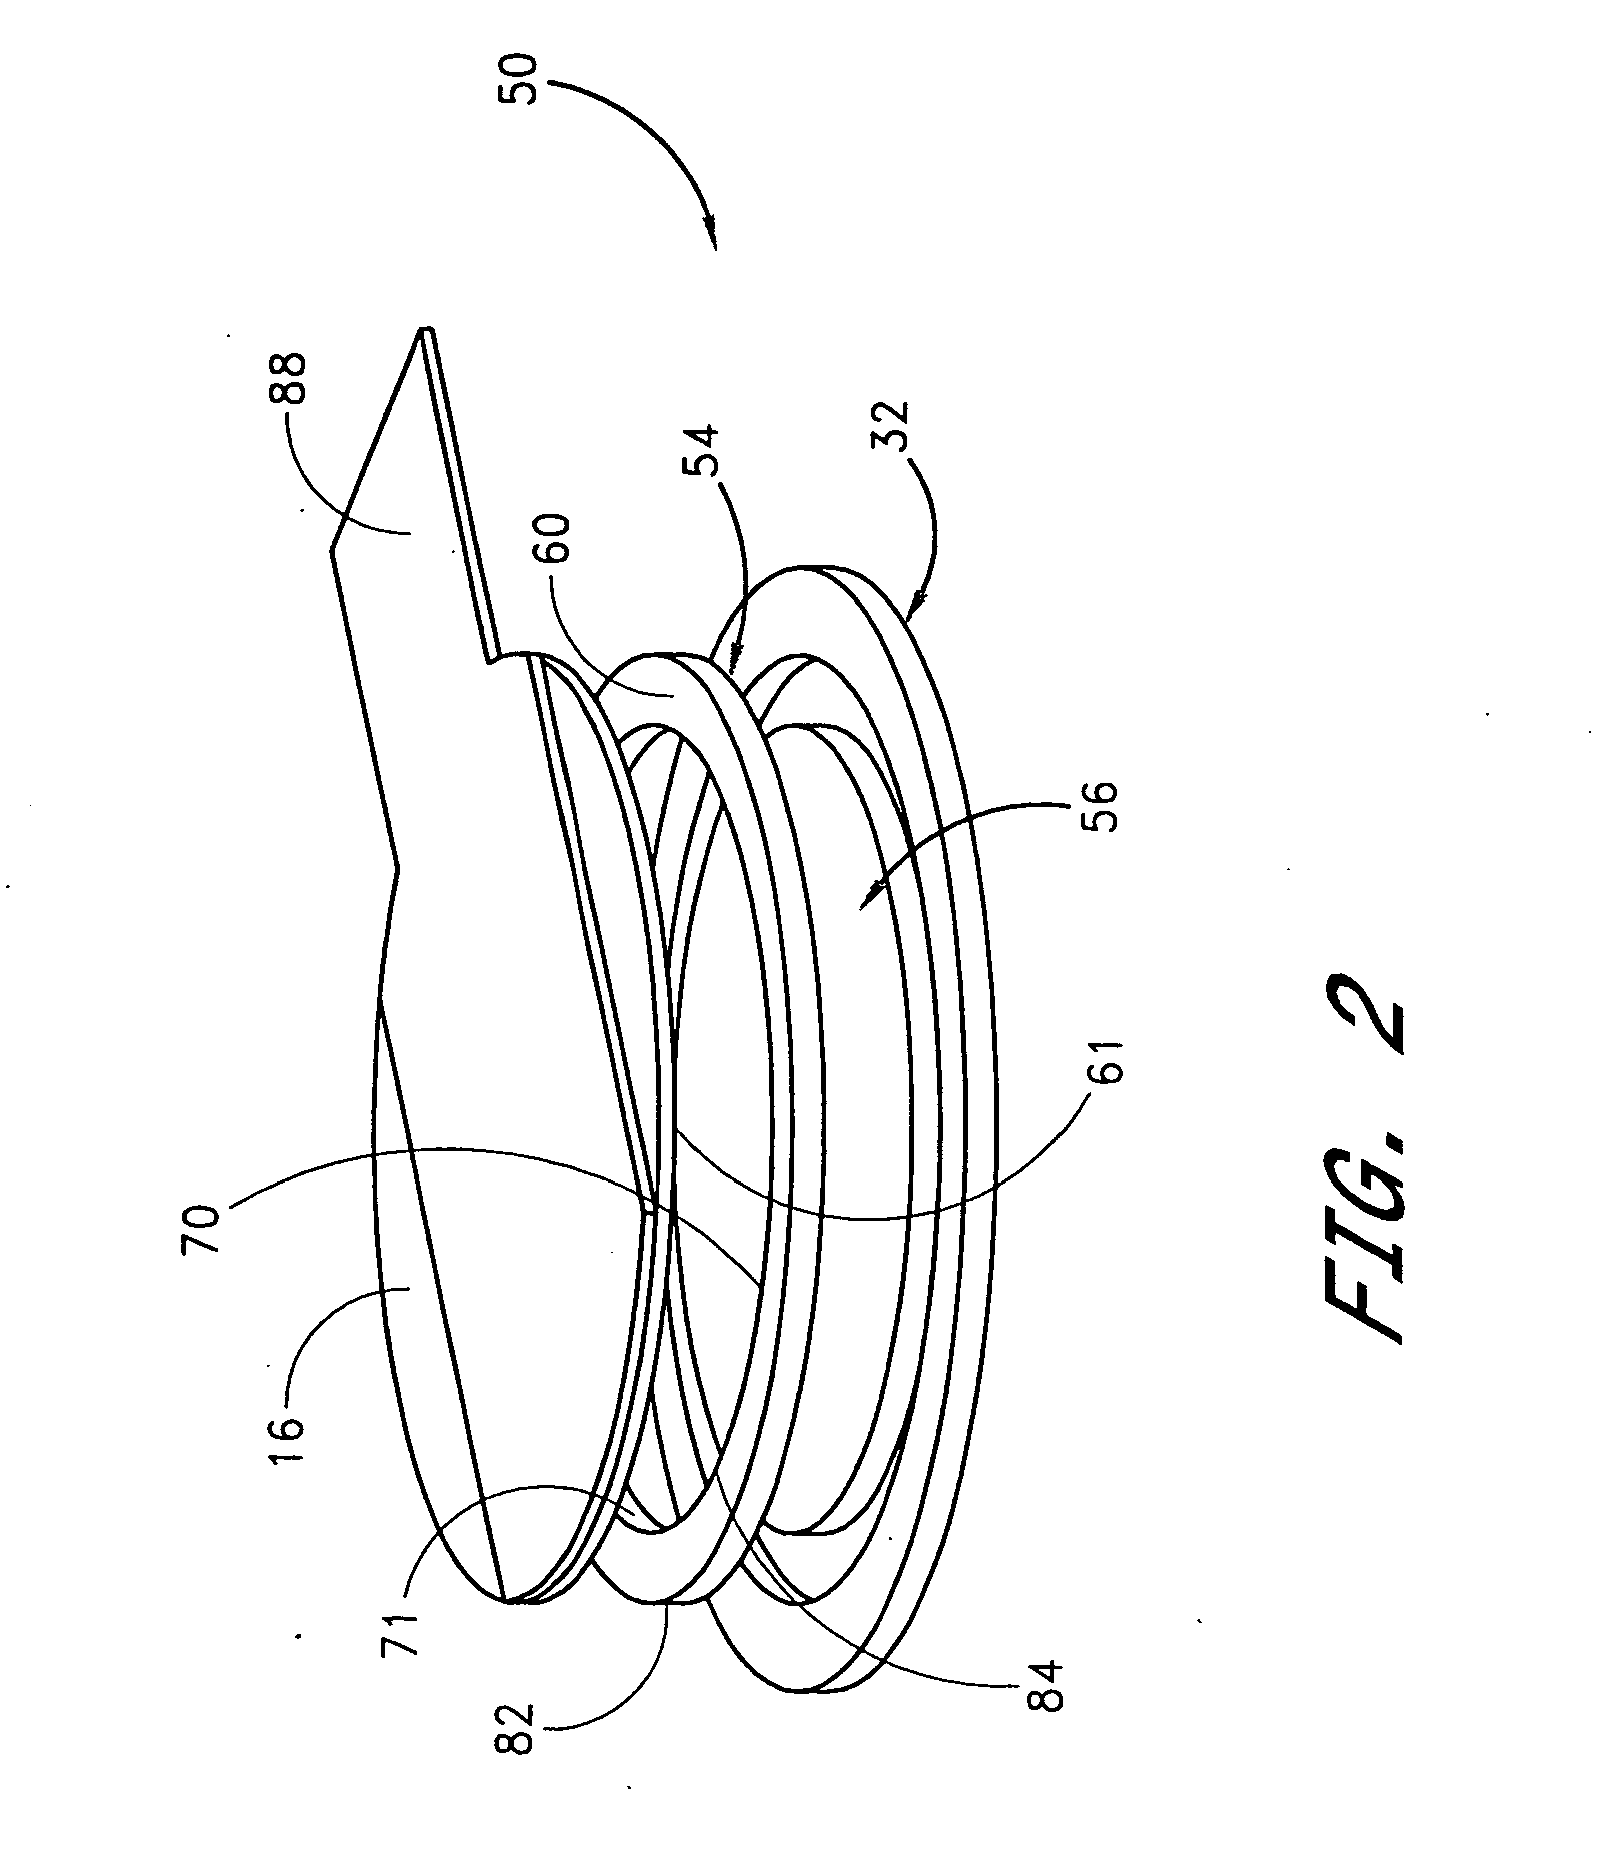 Wafer holder with peripheral lift ring